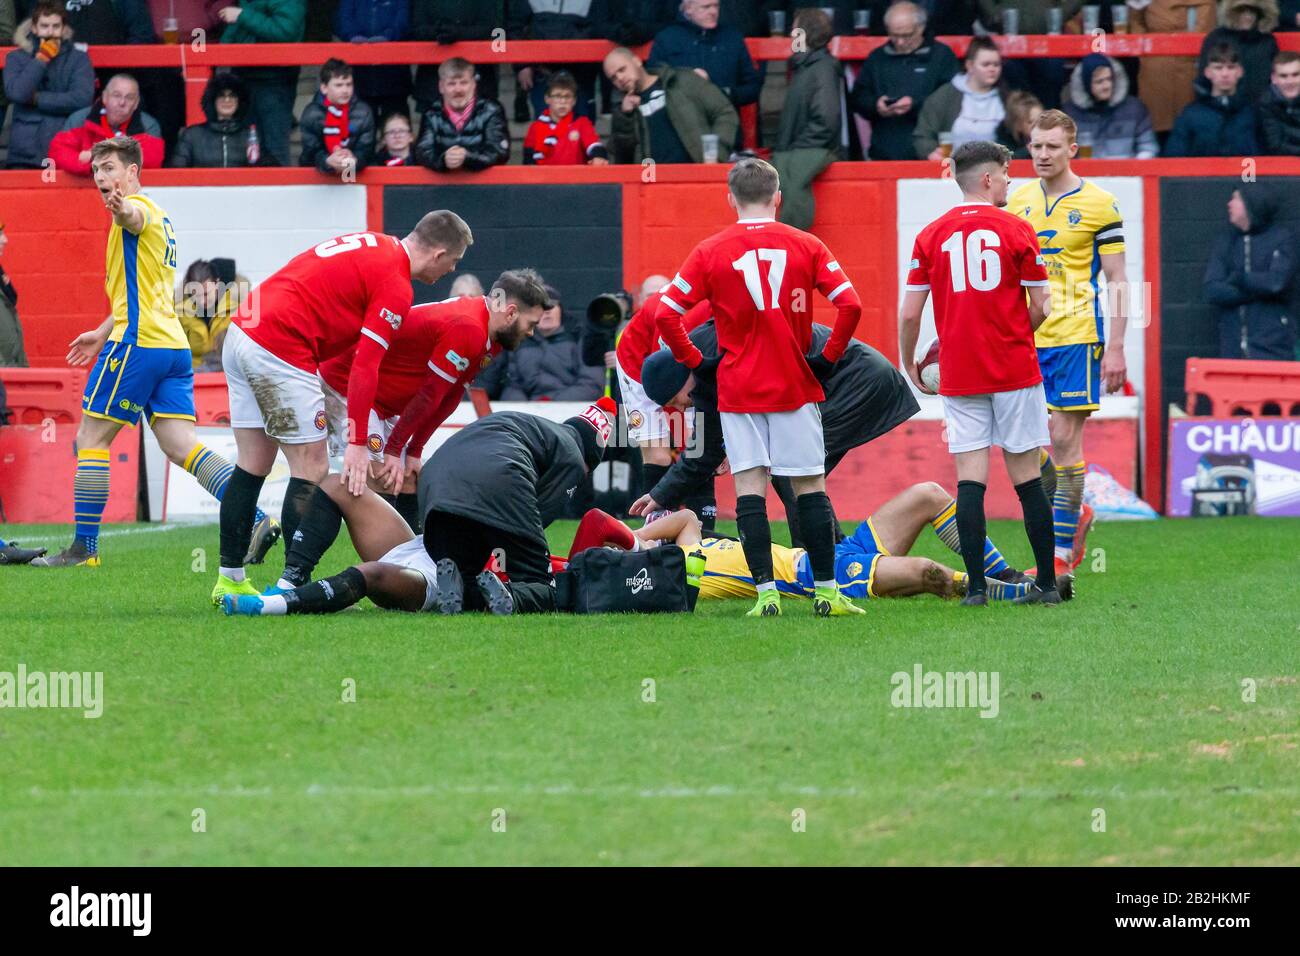 Warrington's Tom Warren clashes heads with an FCUM player and assistance is given as both players lay on the ground Stock Photo